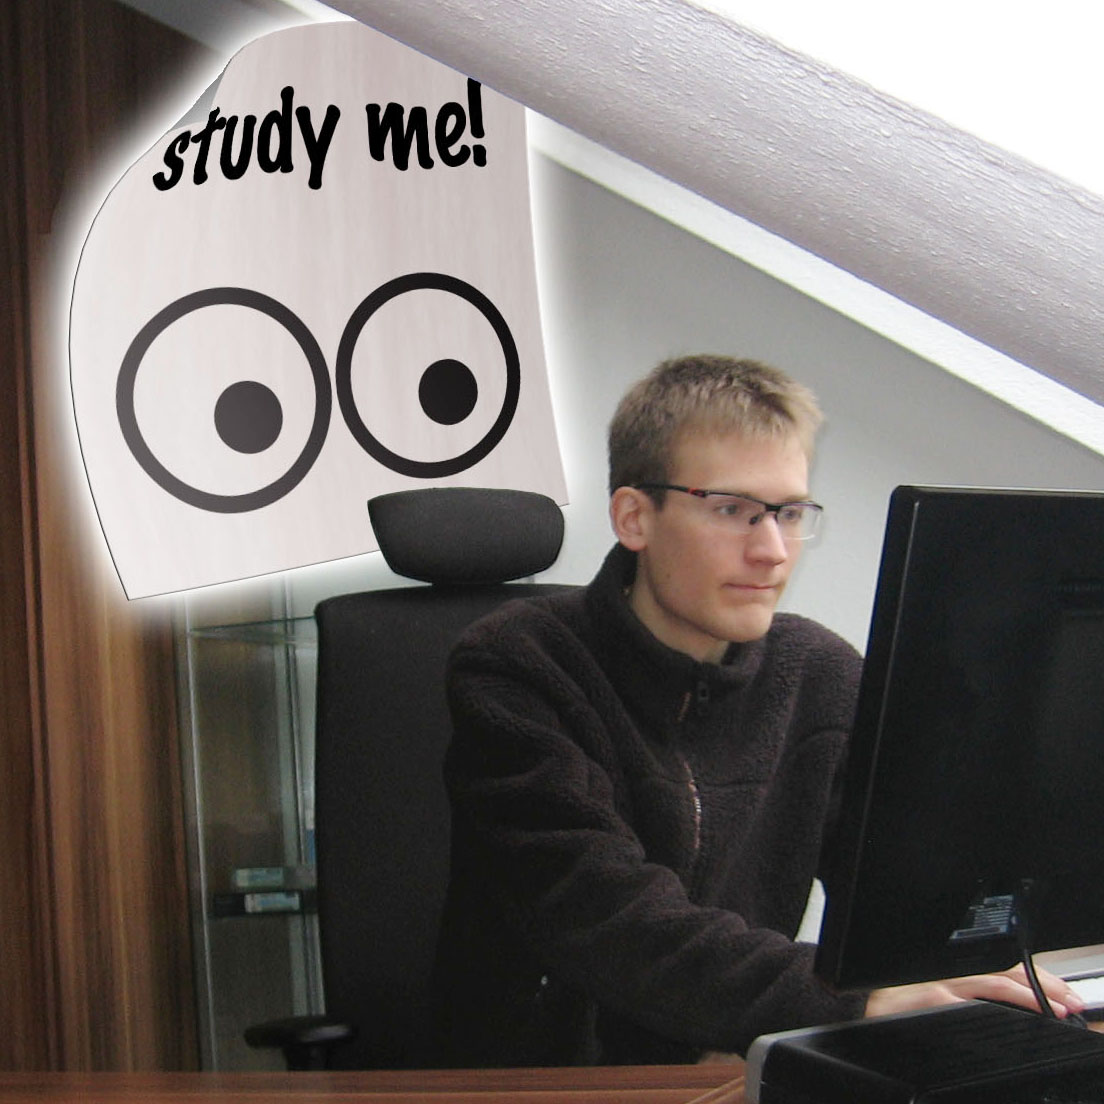 Me being busy ill a post-it saying "duty me" is floating above my head, watching me with big eyes.